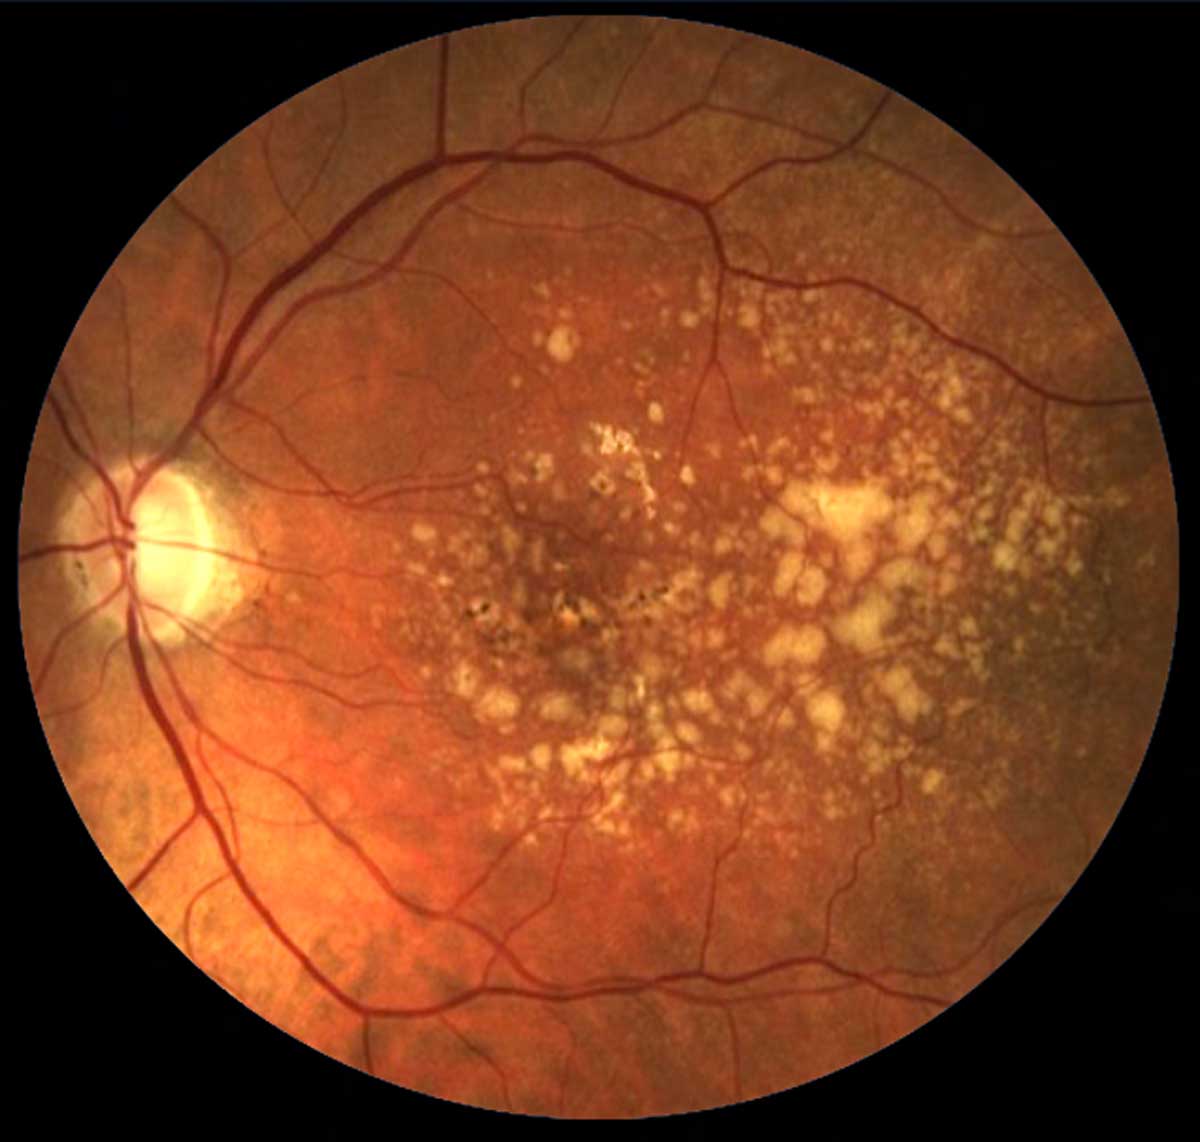 Asian Medicare beneficiaries across several age groups and comorbidities are experiencing accelerated AMD prevalence rates over time, including females between the ages of 40 and 64.